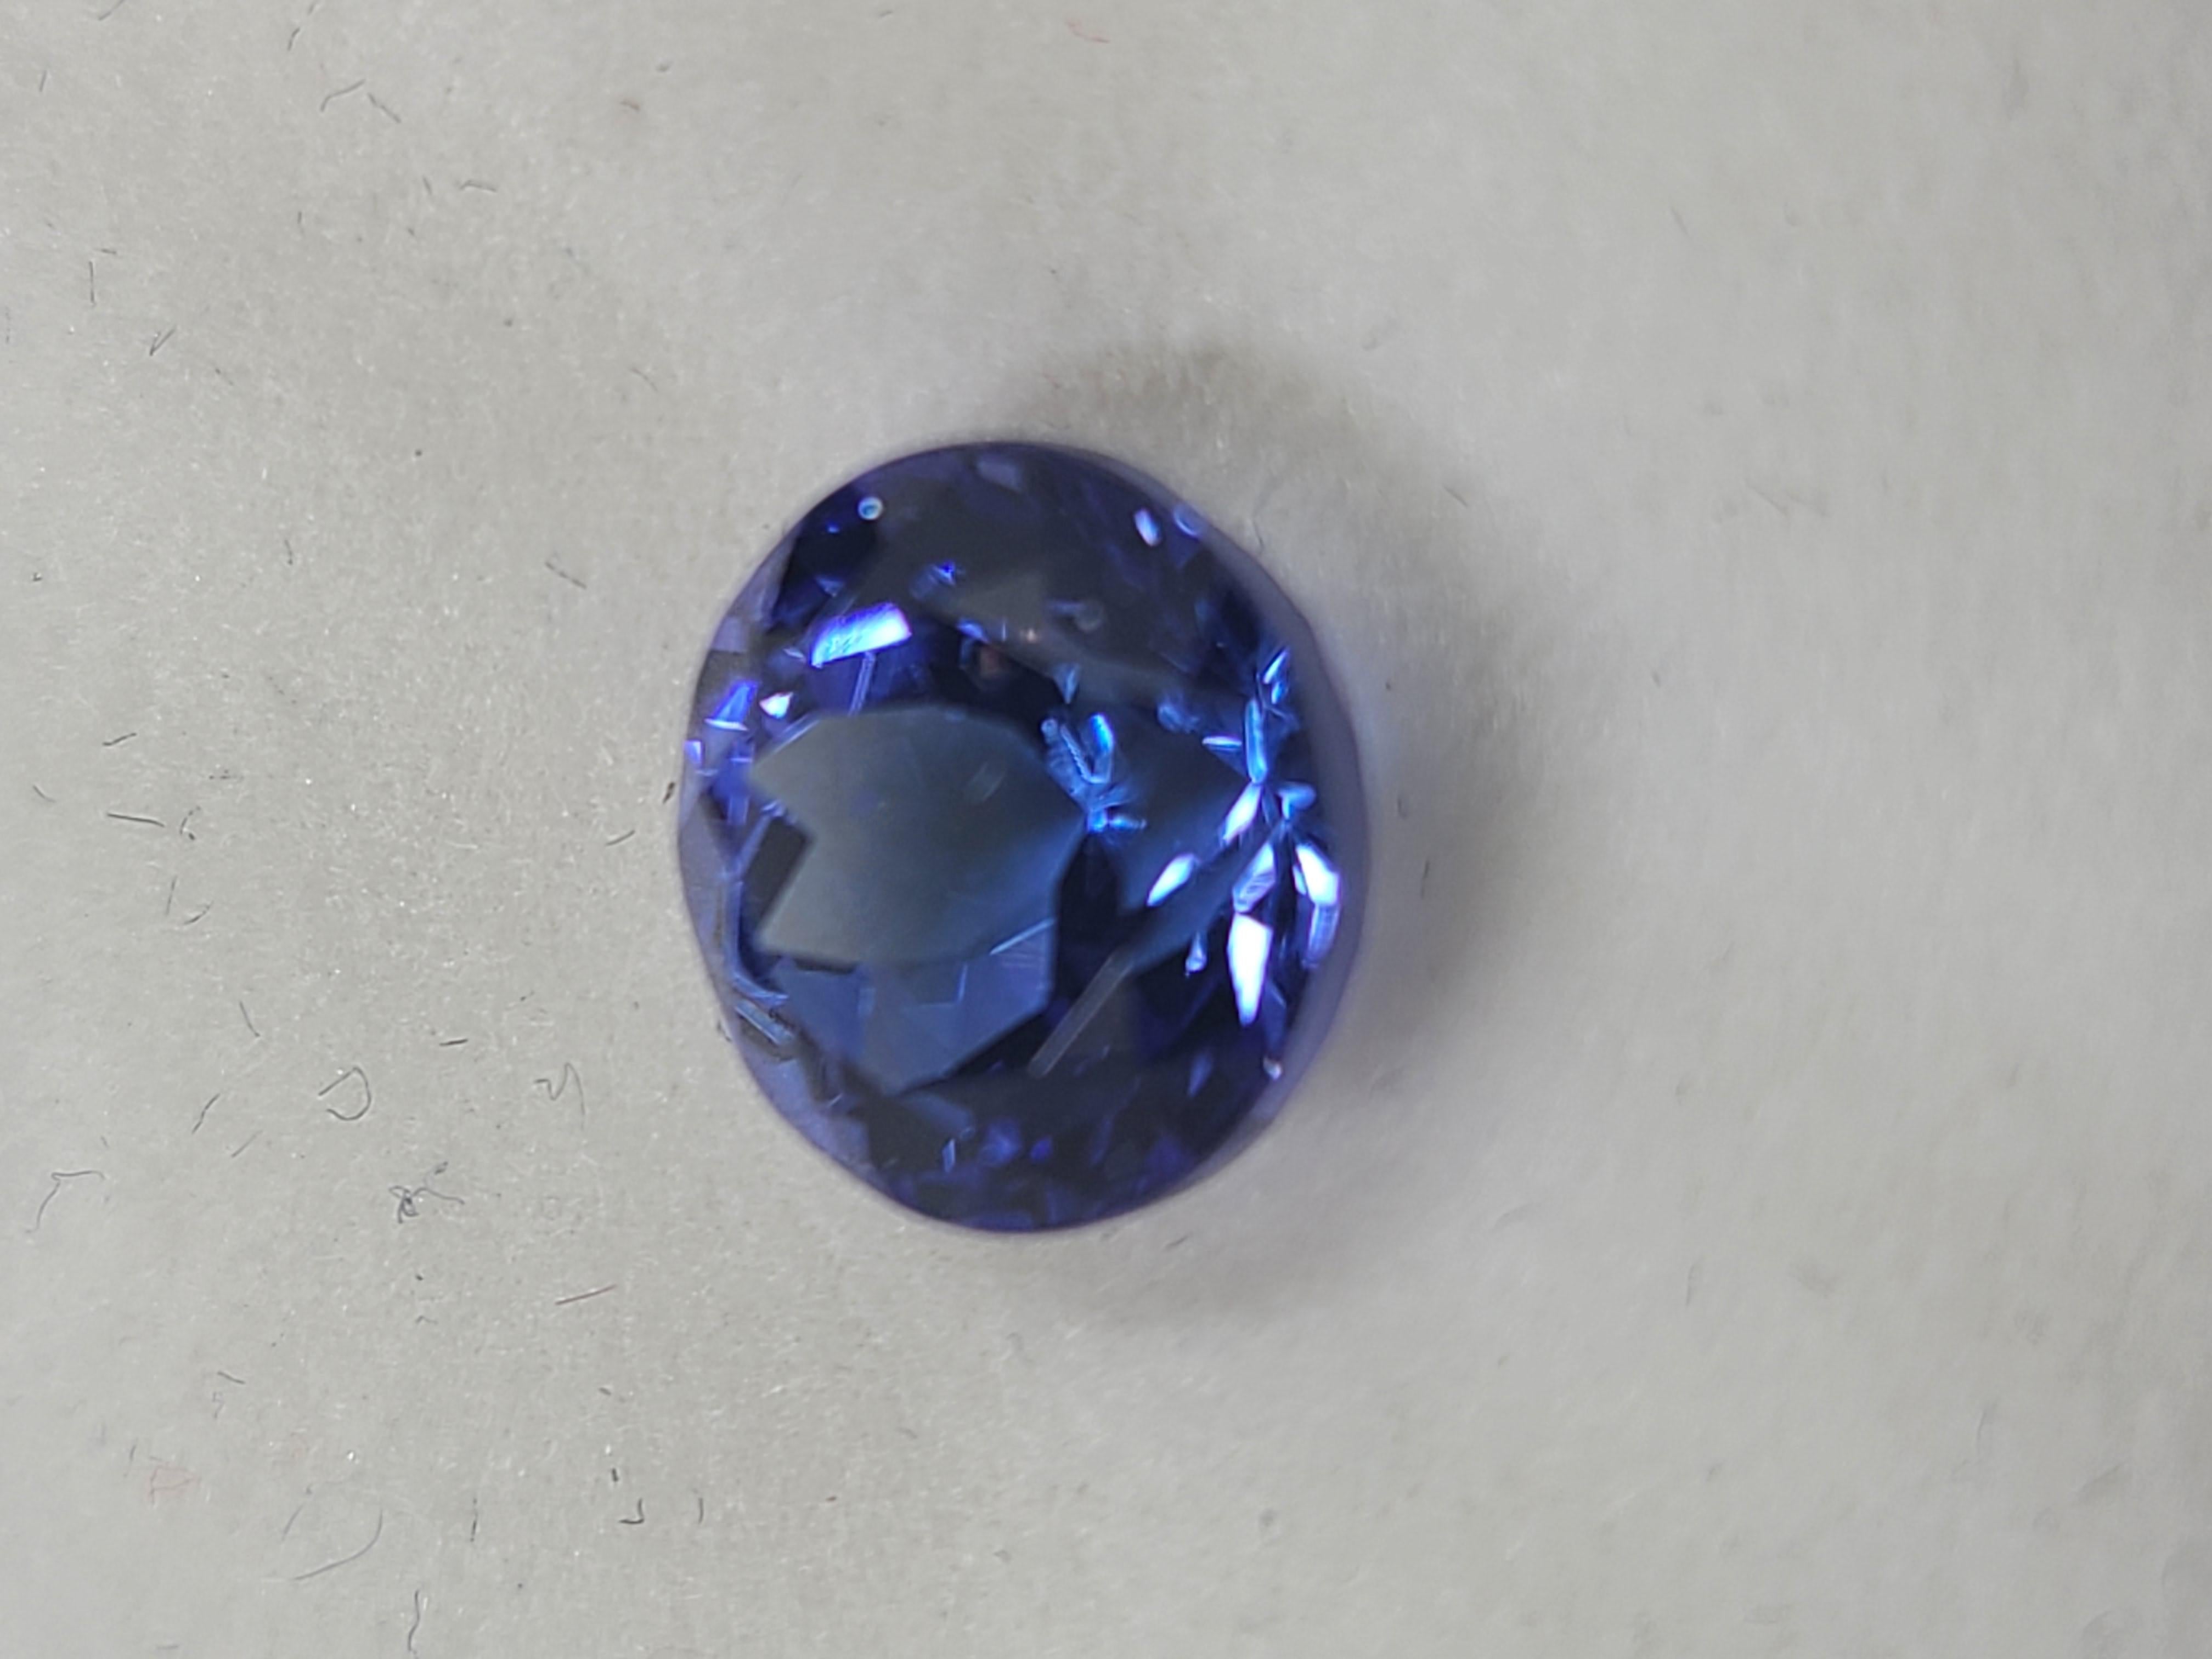 Add this stunning round faceted cut tanzanite to your gemstone and jewelry collection, or make it the main focal point for your next jewelry design. 

This single loose stone measures 9mm round with 6.90mm depth, exhibiting intense bluish-violet